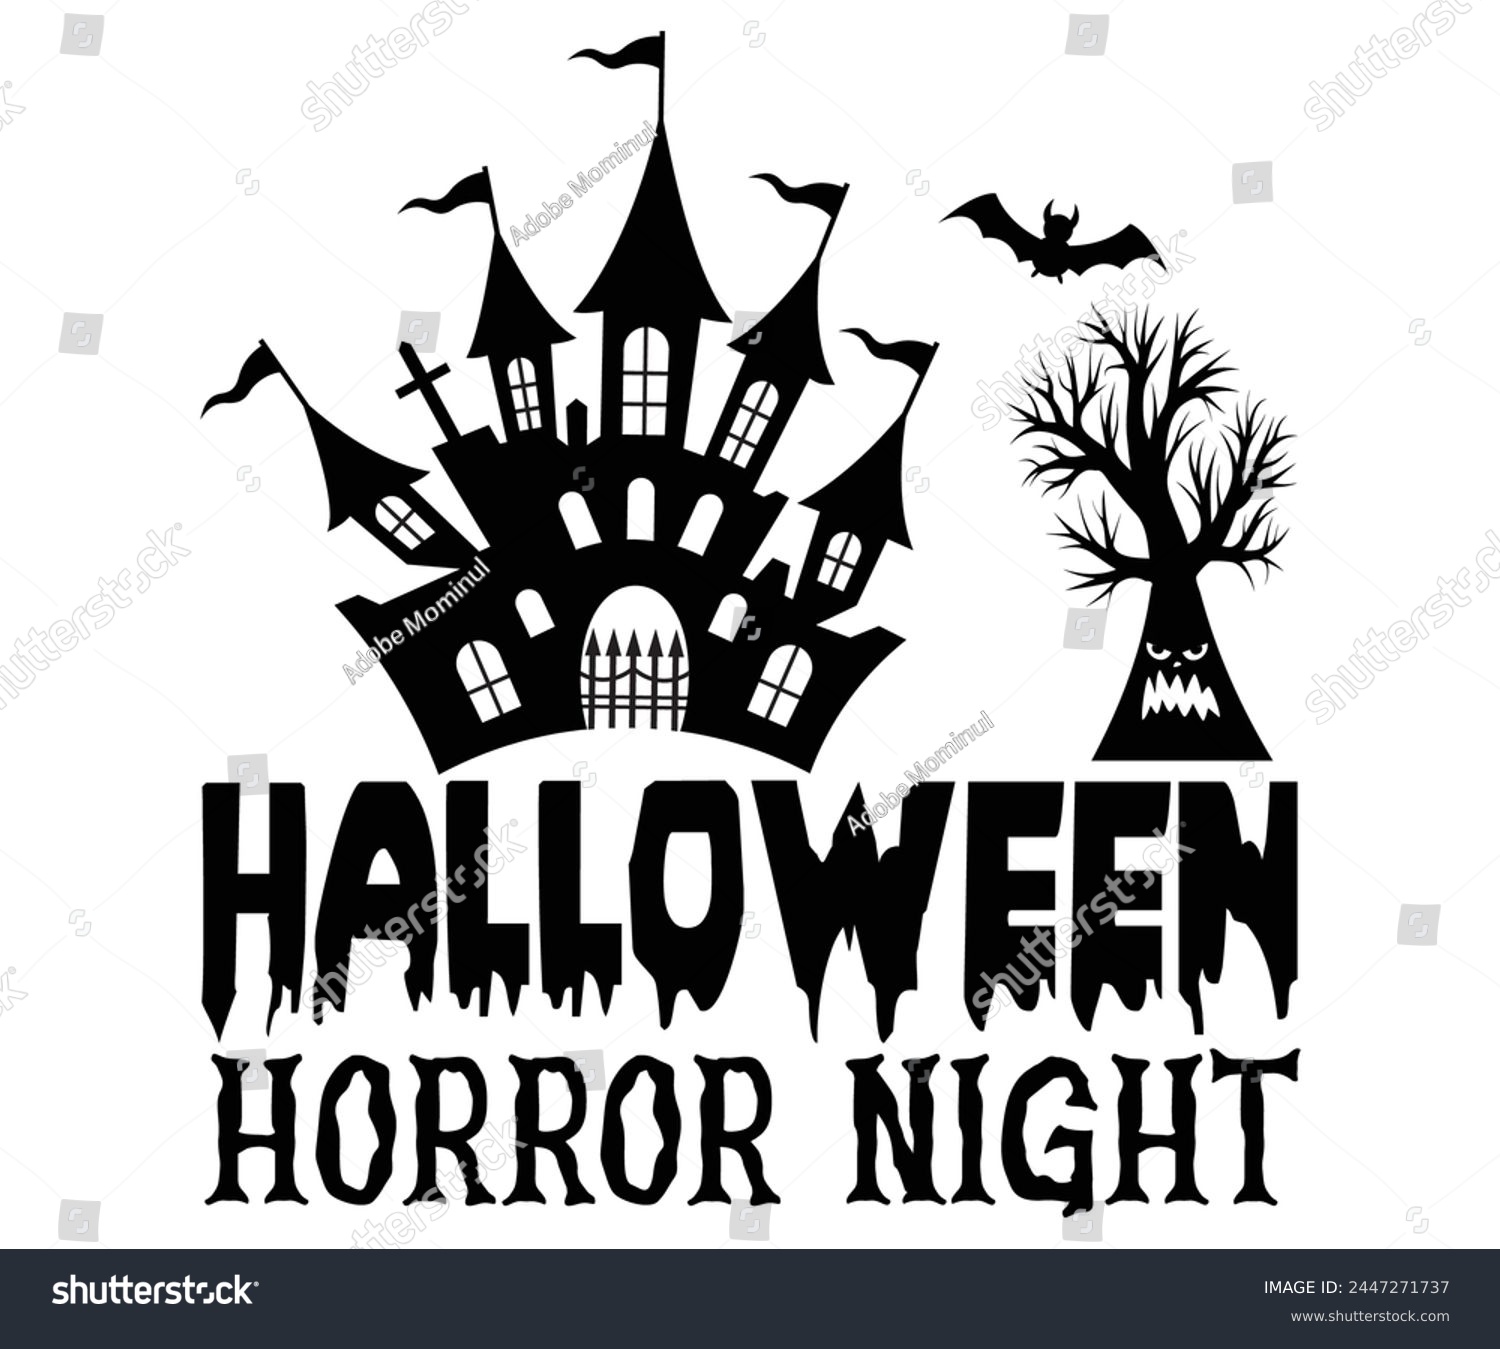 SVG of Halloween Horror Night,Halloween Svg,Typography,Halloween Quotes,Witches Svg,Halloween Party,Halloween Costume,Halloween Gift,Funny Halloween,Spooky Svg,Funny T shirt,Ghost Svg,Cut file svg